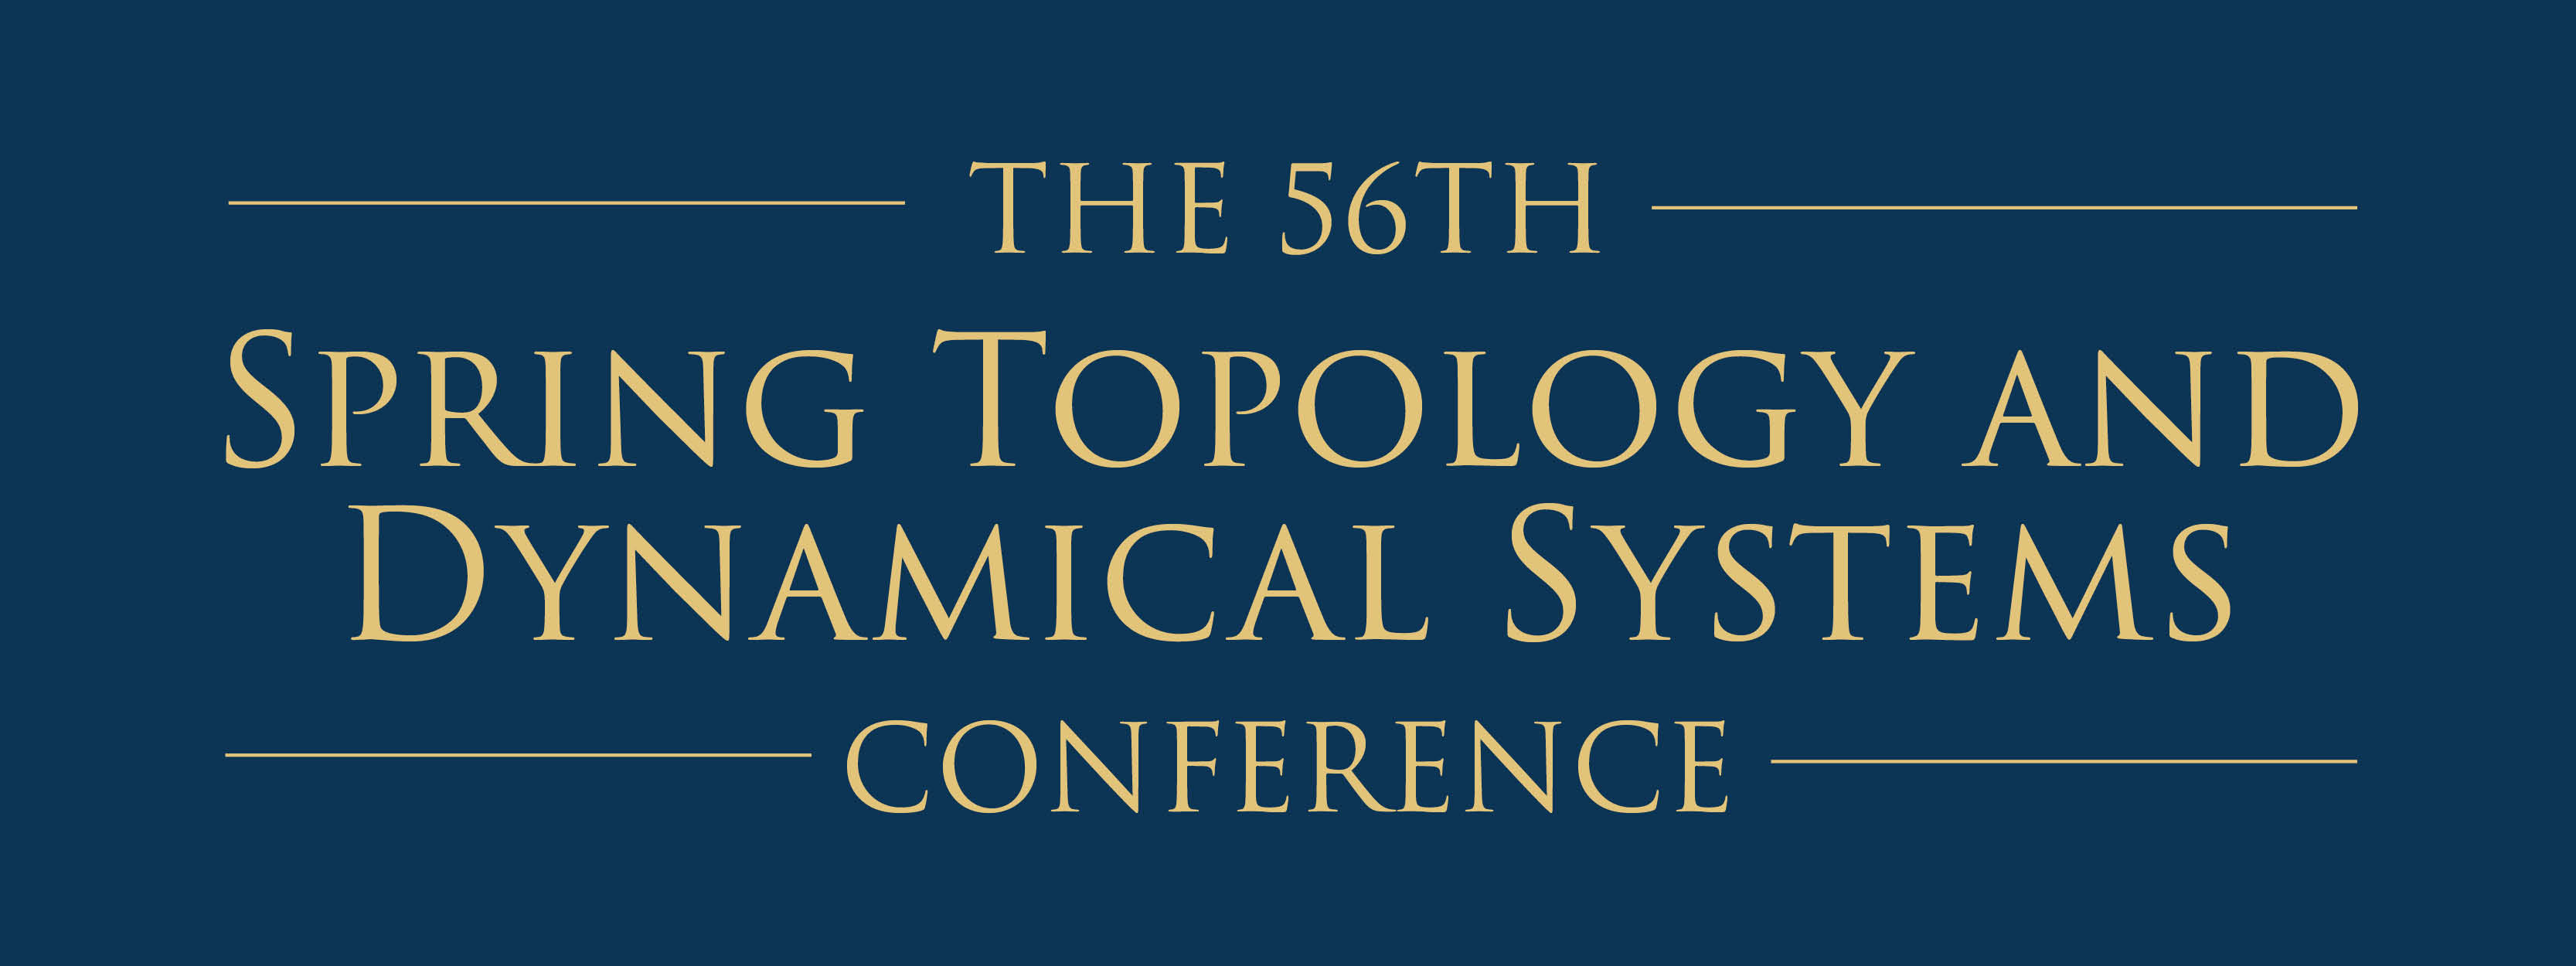 56th Spring Topology and Dynamical Systems Conference